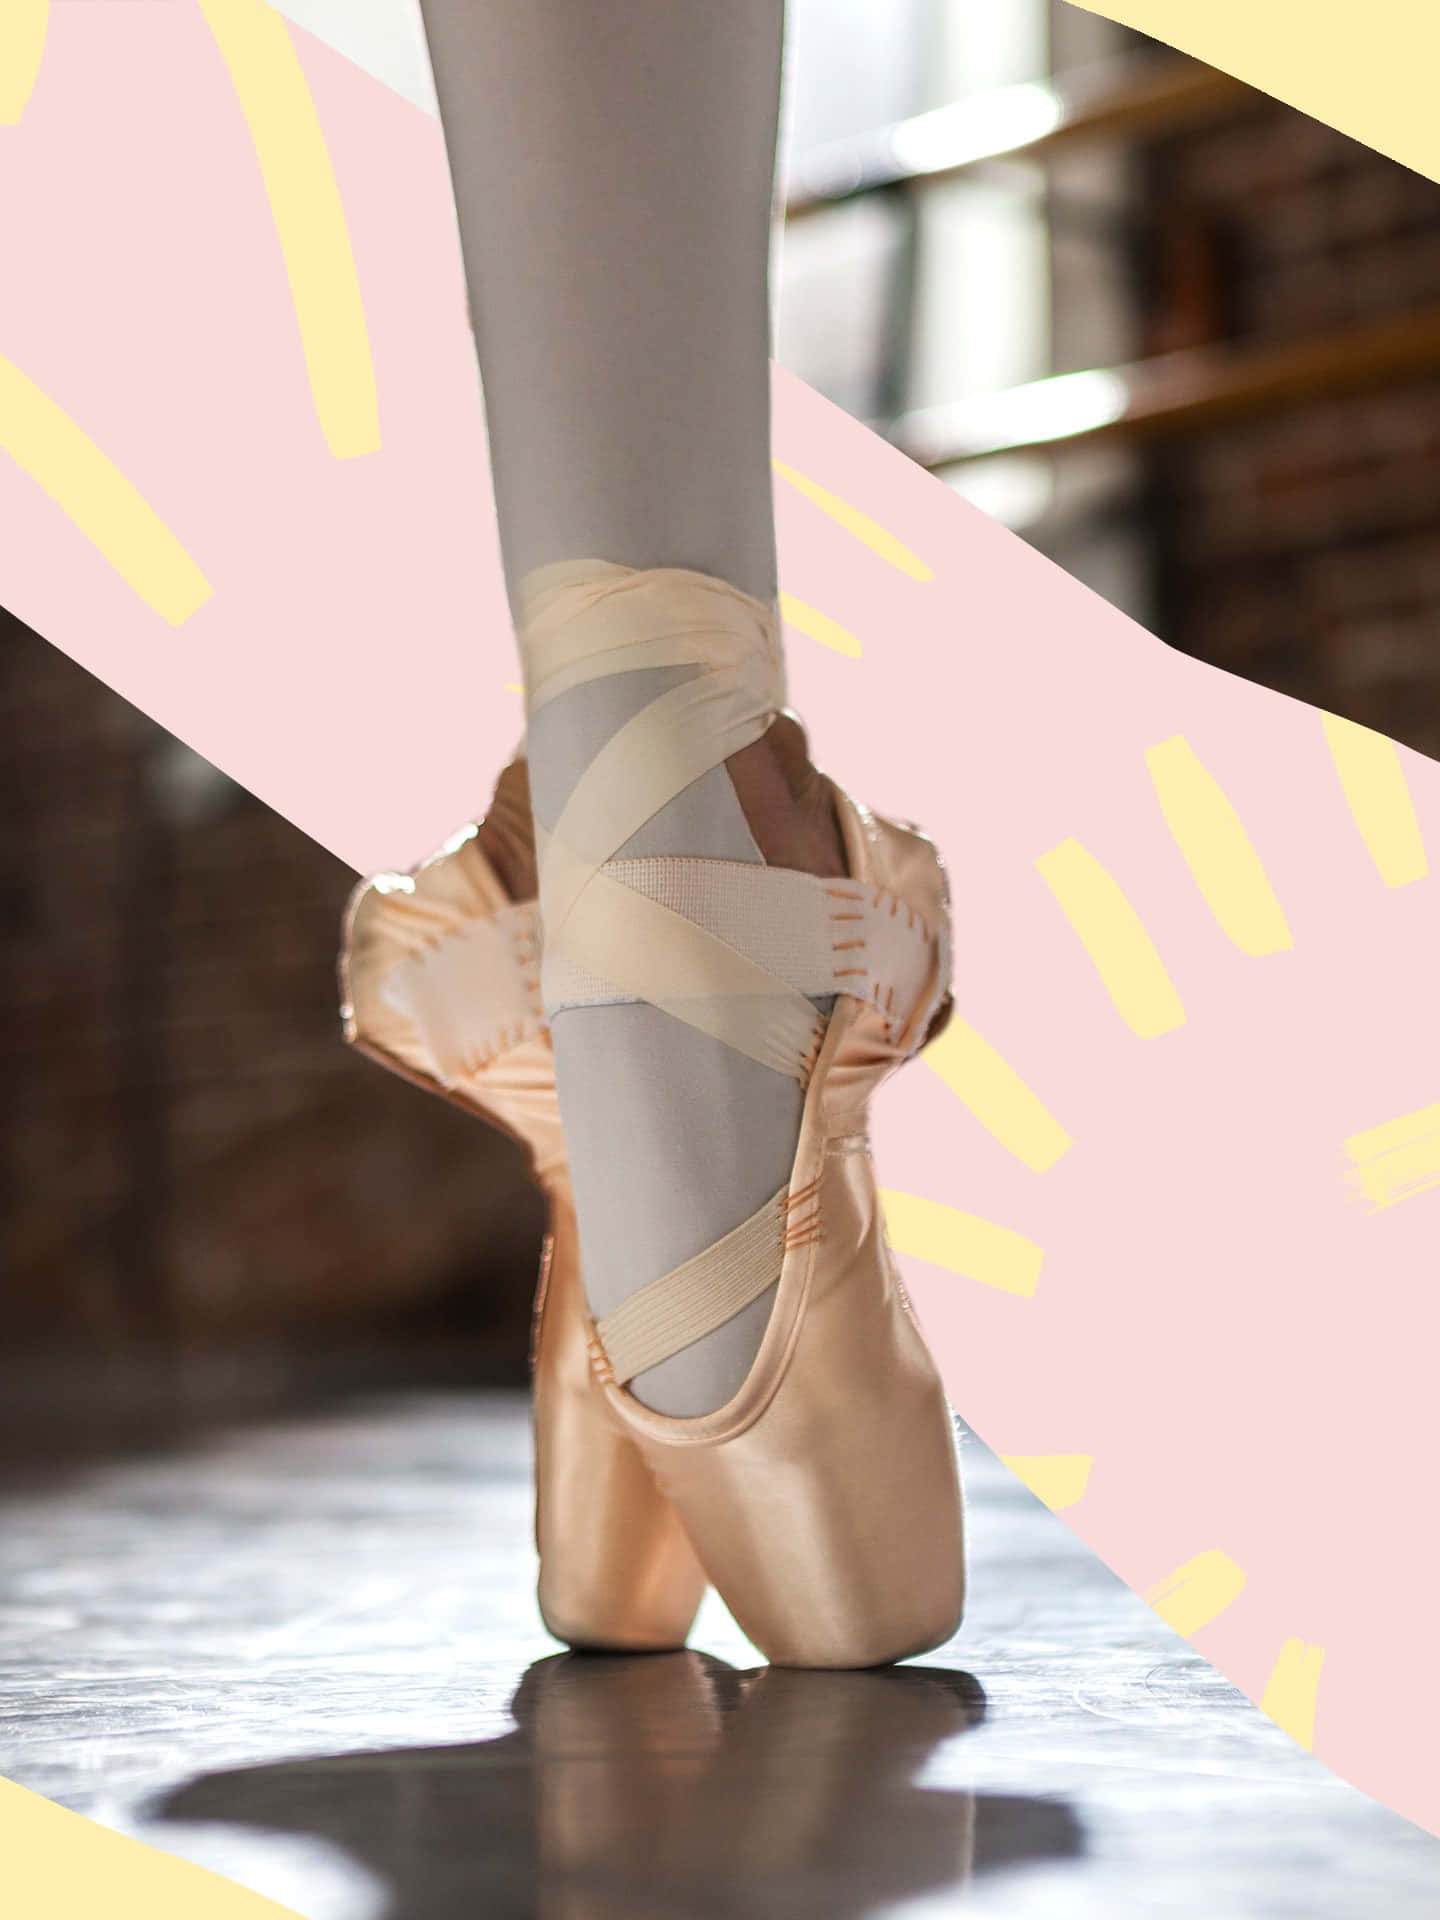 Ballet Shoes With Pink Ribbons On The Feet Wallpaper